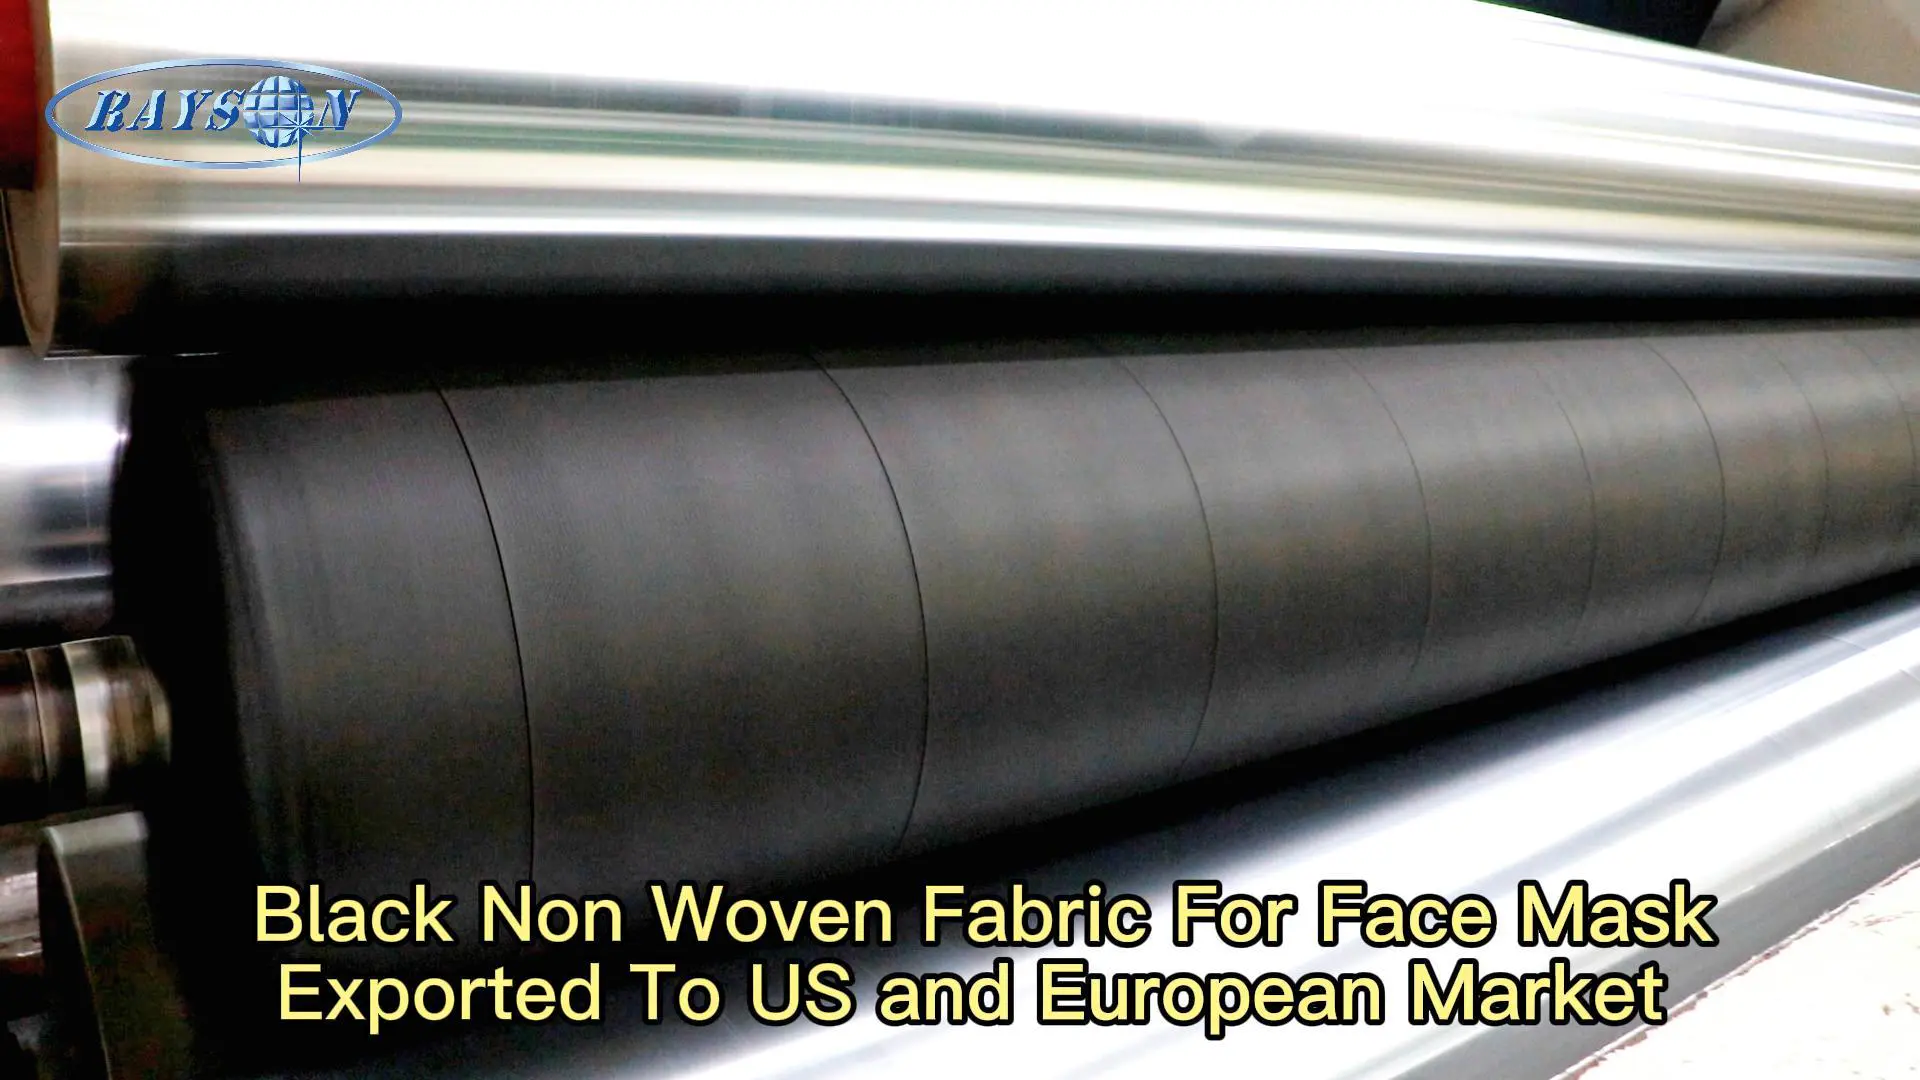 Production of black SS non woven fabric for face mask